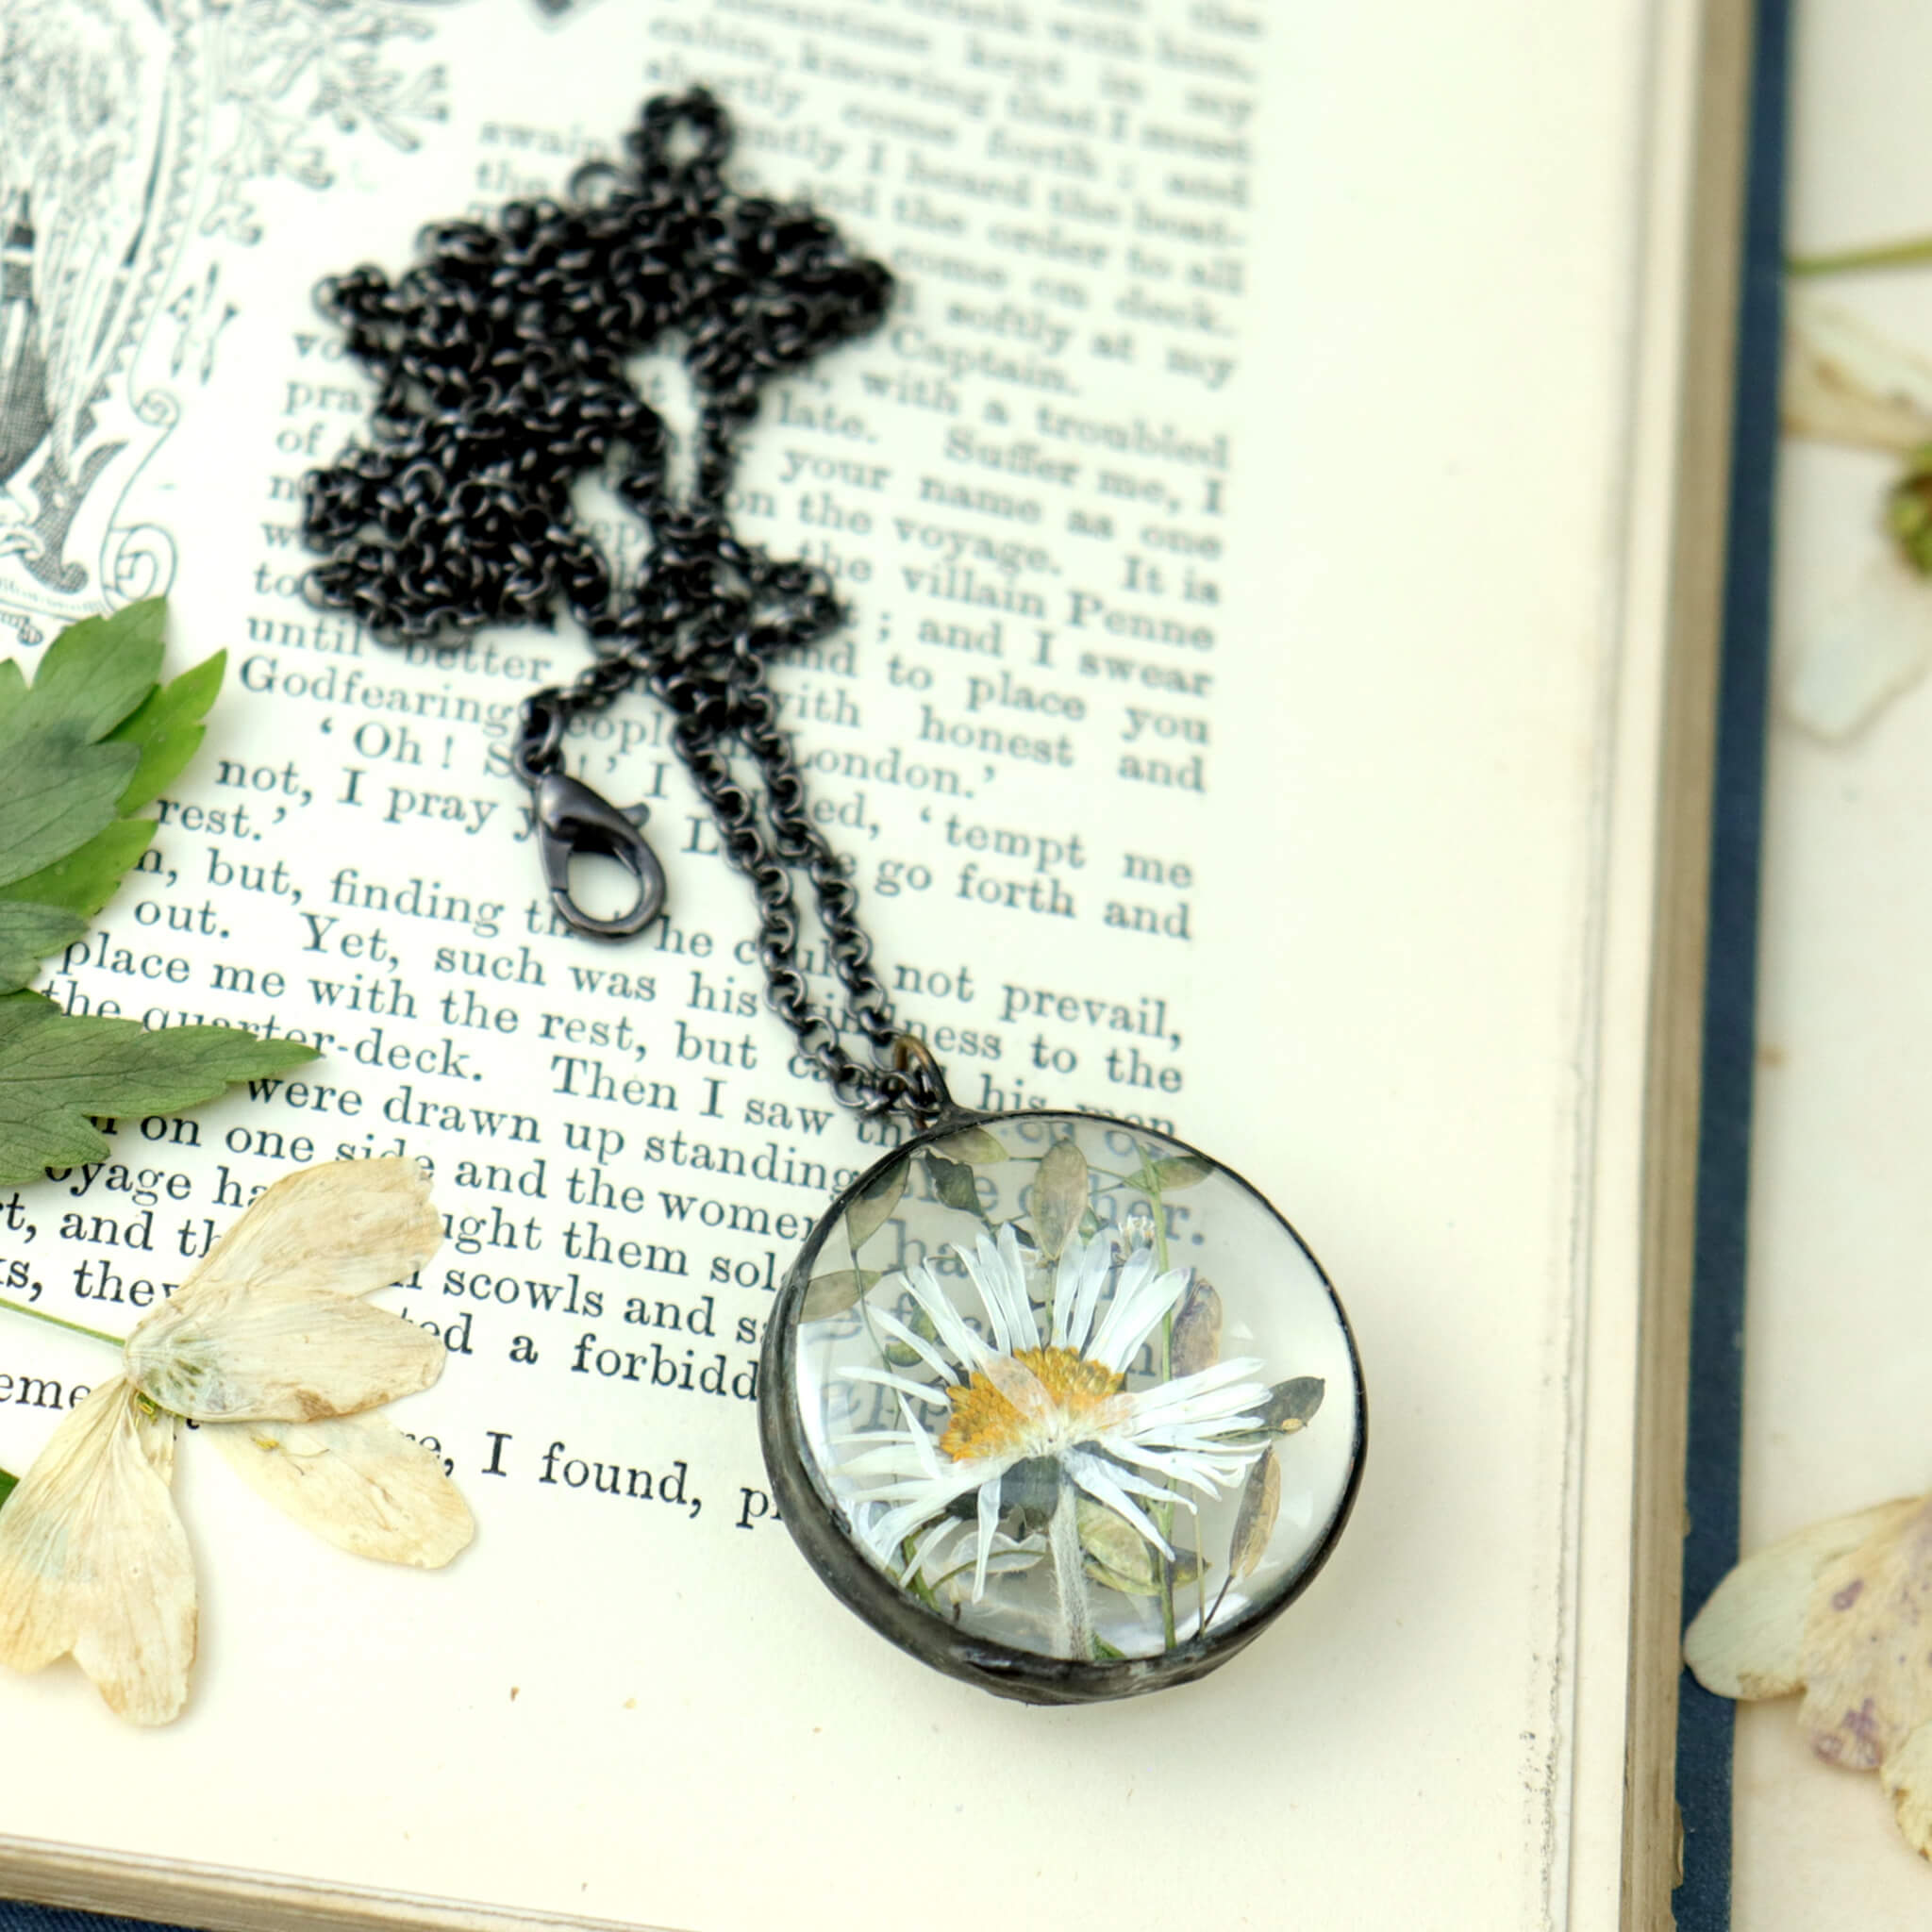 Pressed daisy necklace in round shape lying on an old book. Pressed anemones around